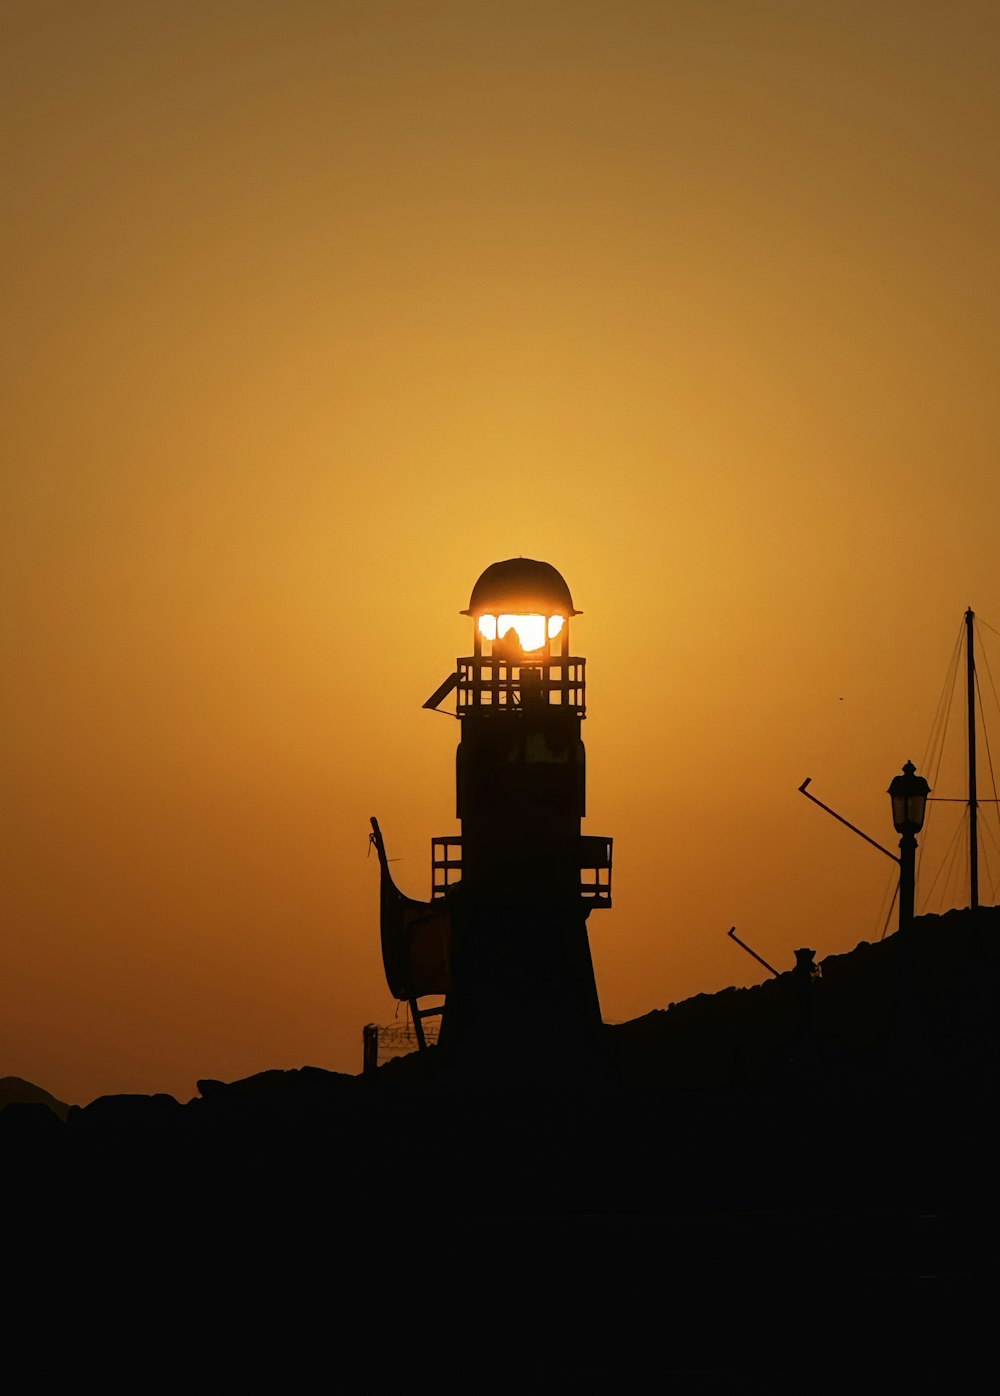 the sun is setting behind a light house